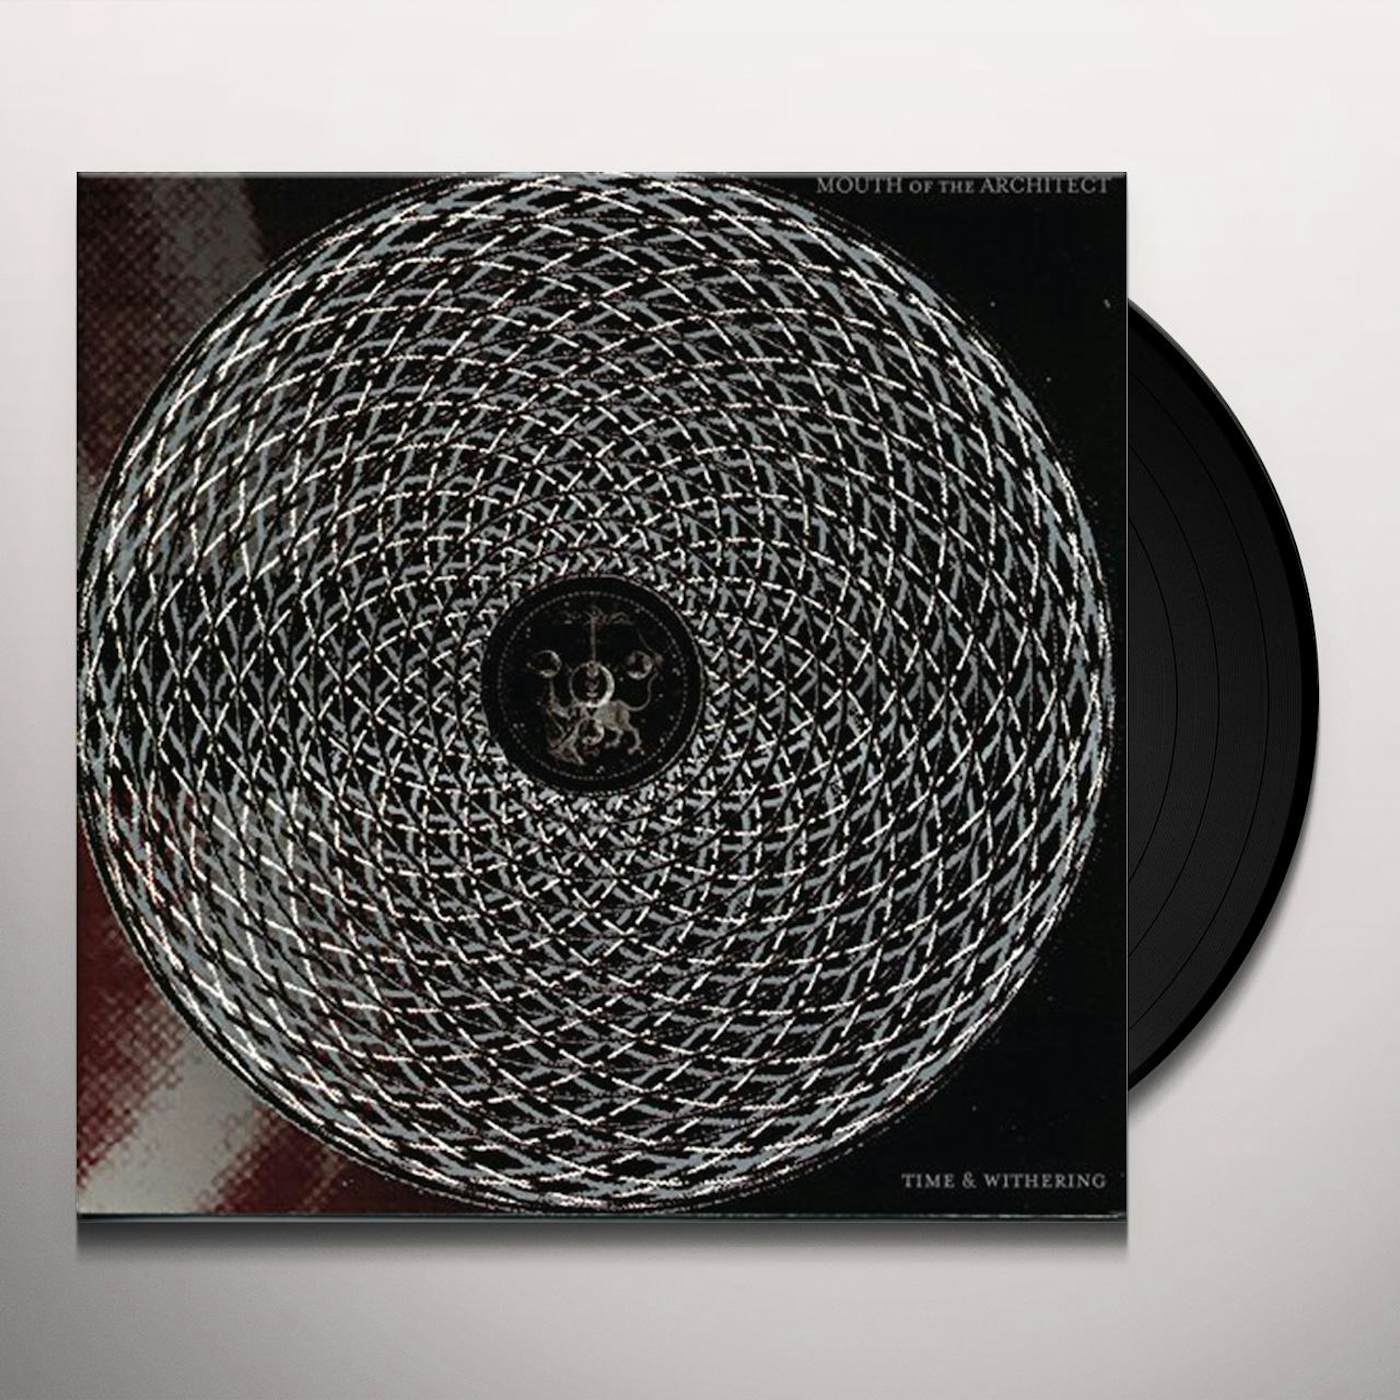 Mouth Of The Architect Time & Withering Vinyl Record